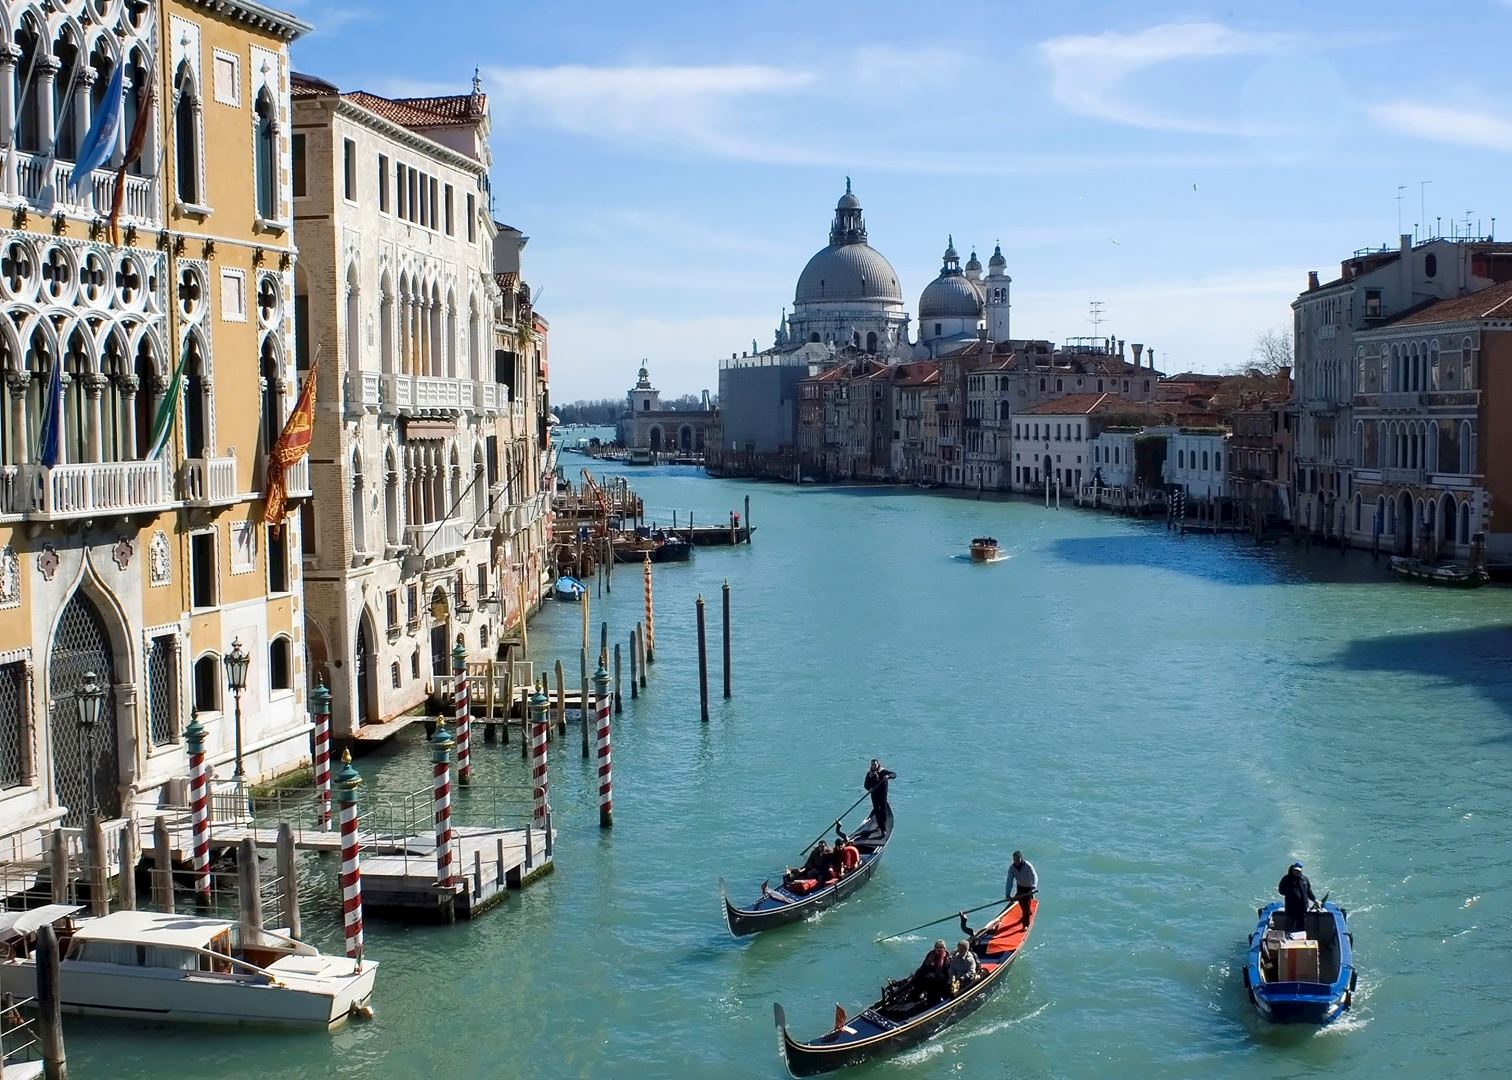 Tailor-made vacations to Venice | Audley Travel